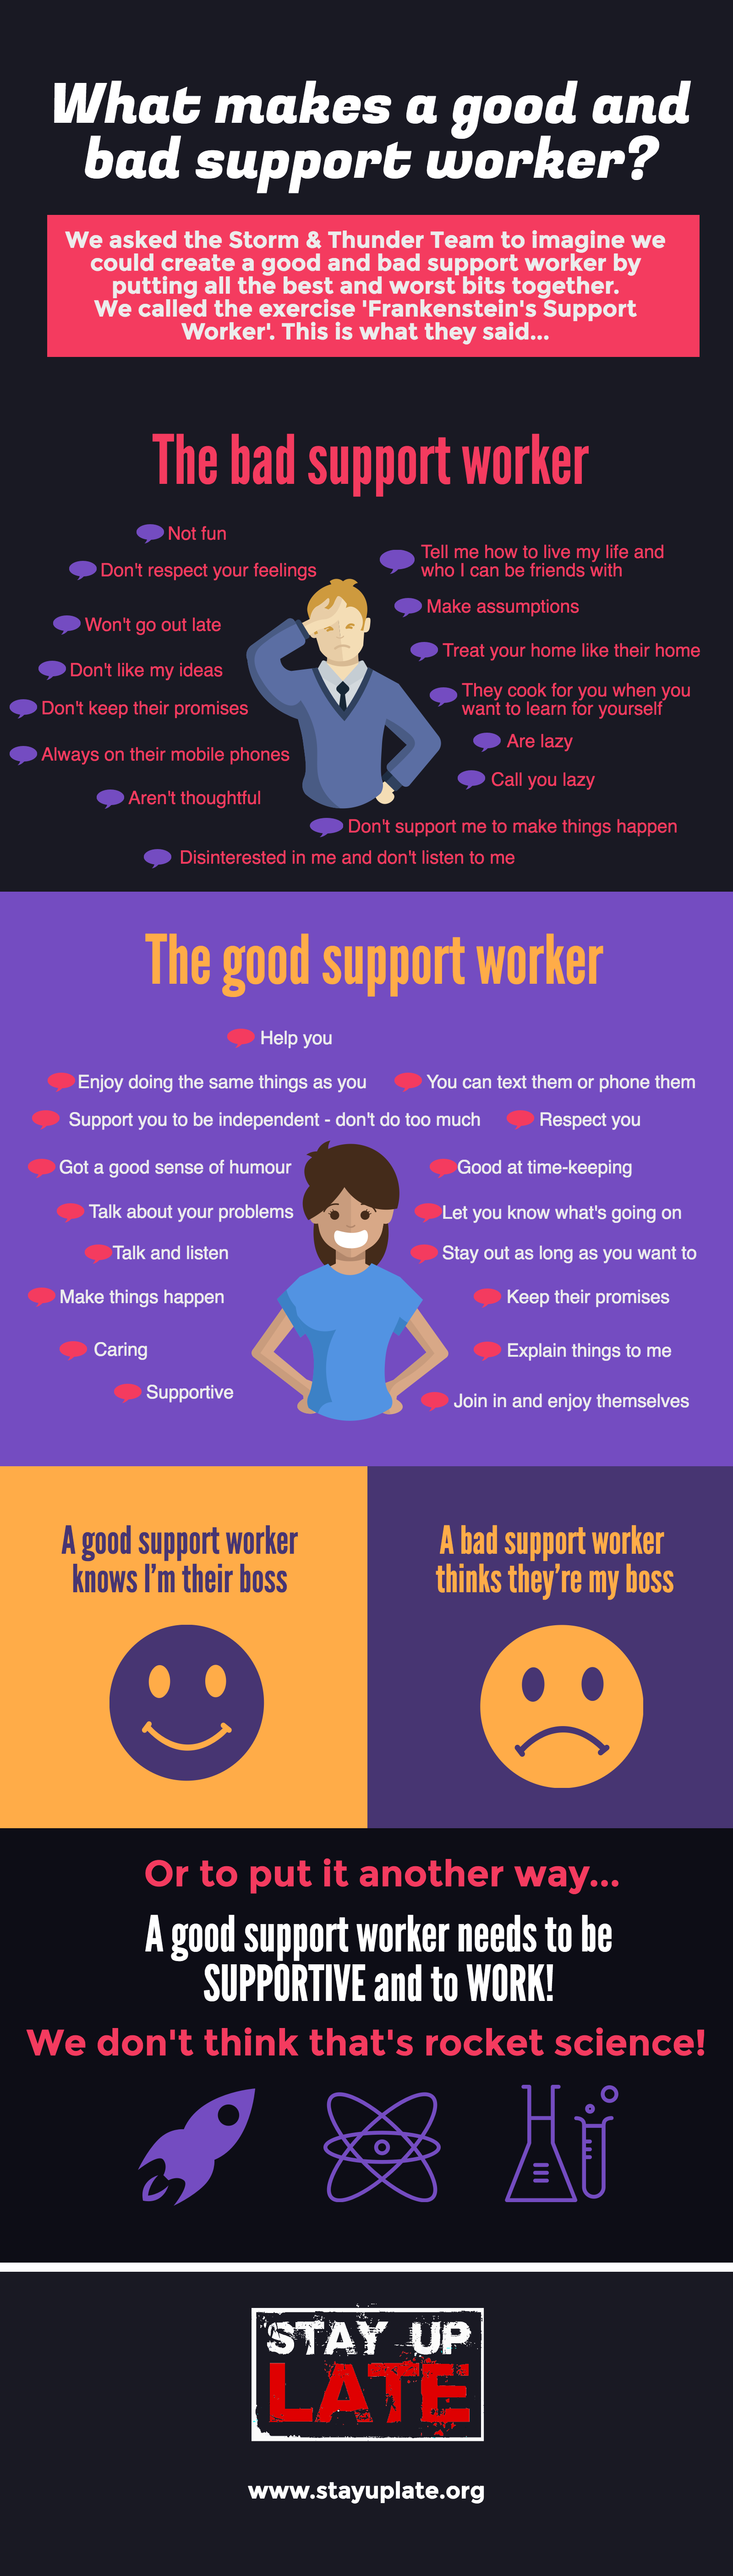 Support worker - what makes a good one?